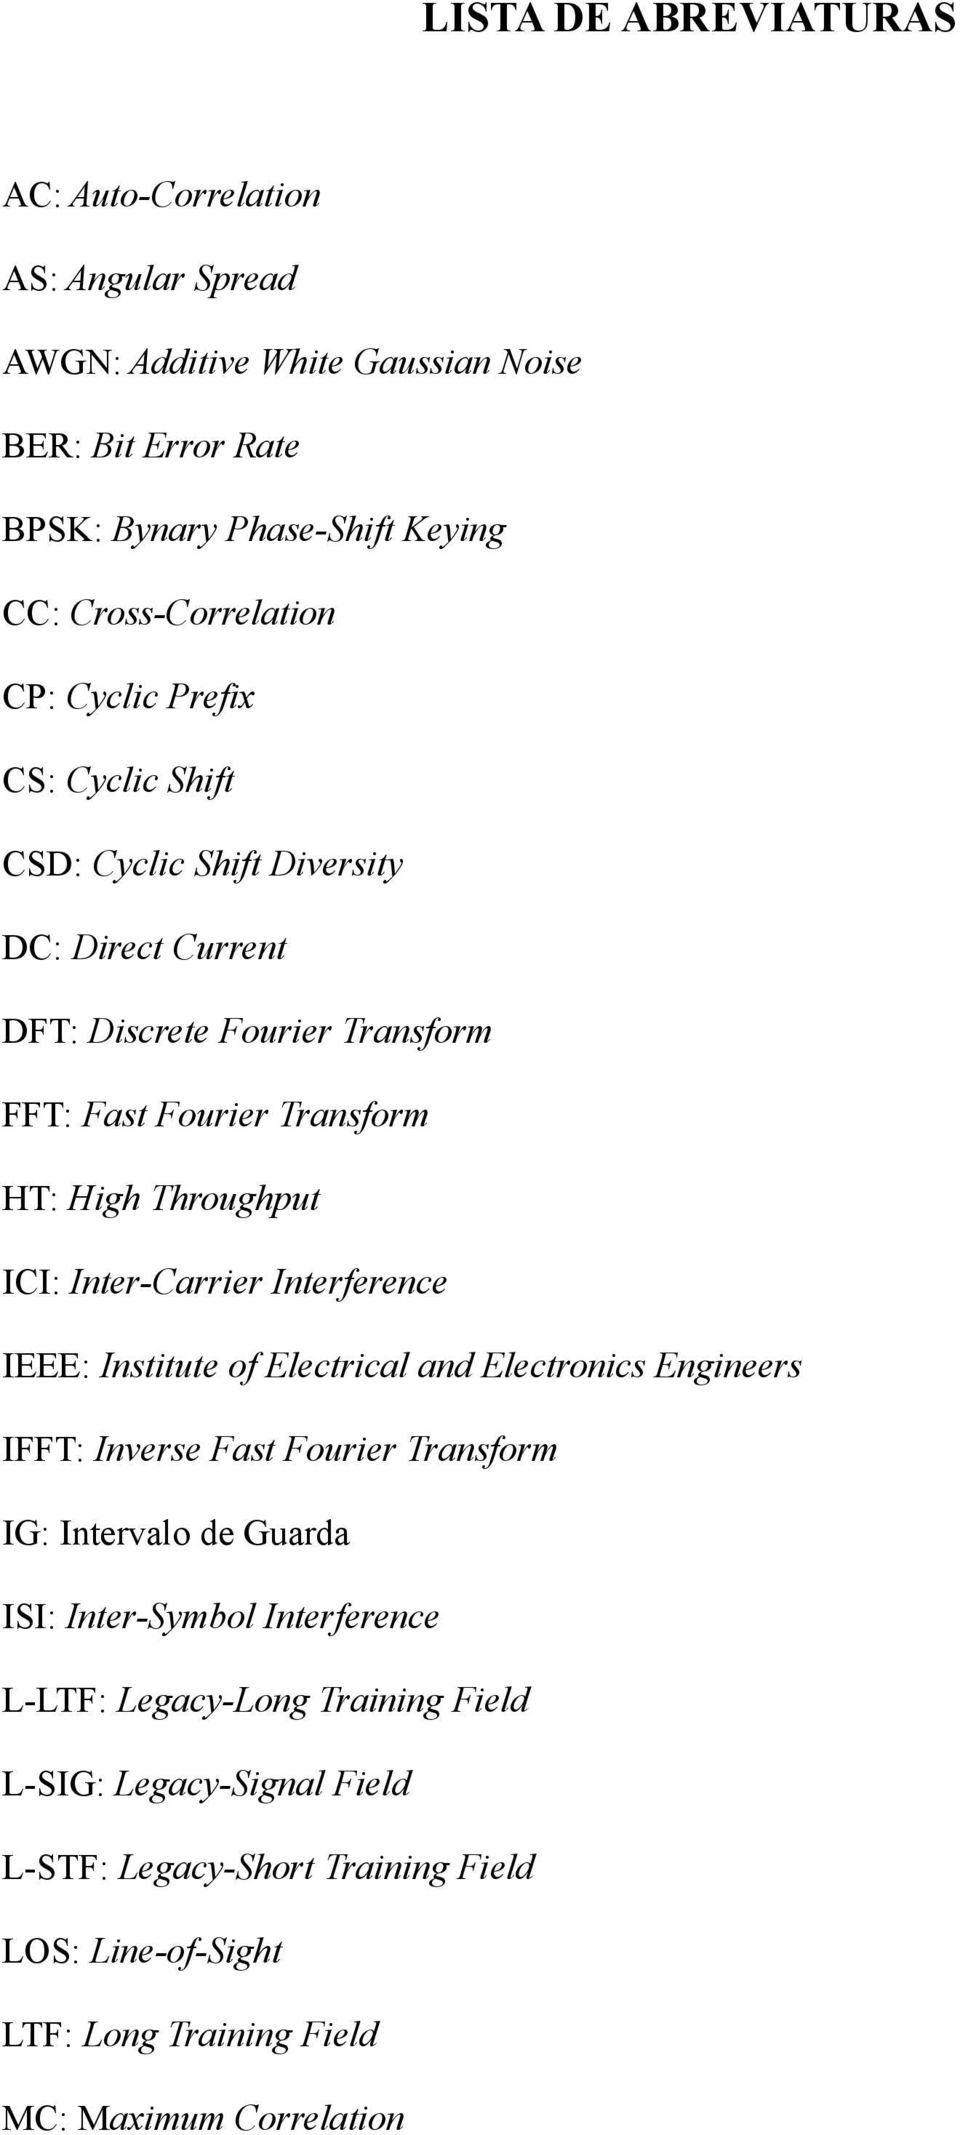 Throughput ICI: Inter-Carrier Interference IEEE: Institute of Electrical and Electronics Engineers IFFT: Inverse Fast Fourier Transform IG: Intervalo de Guarda ISI: